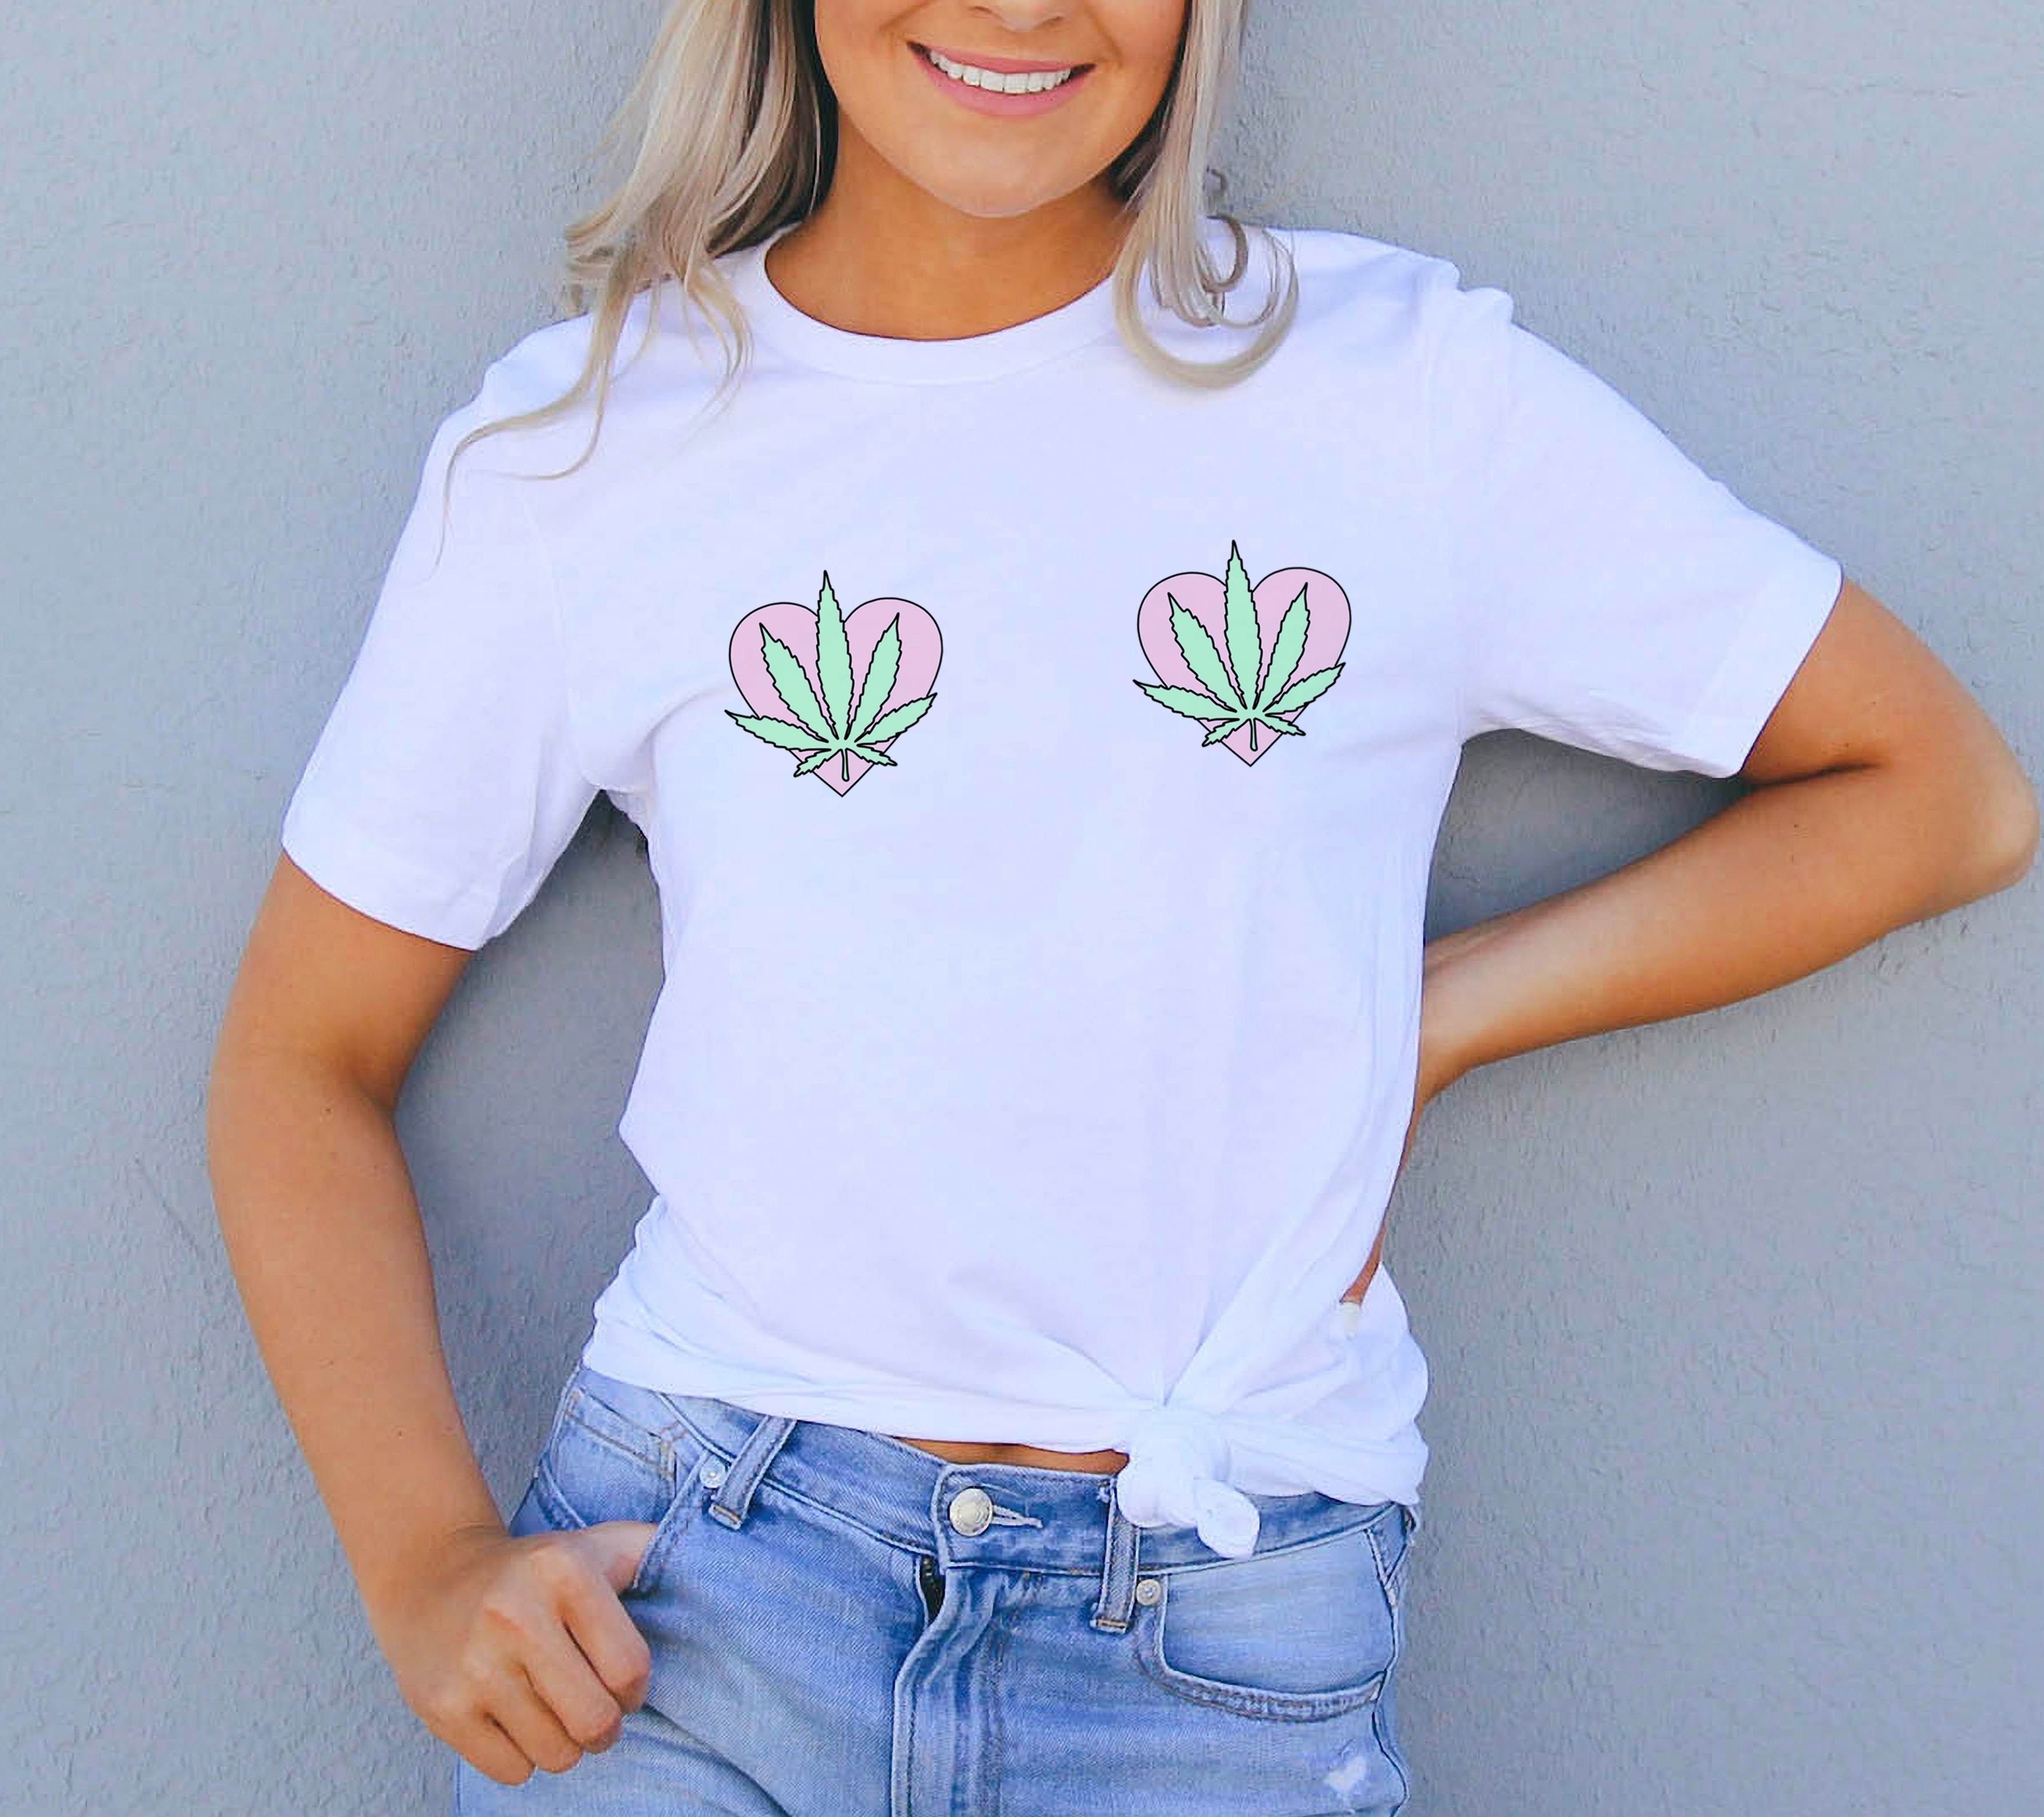 White shirt with weed leaf and heart placed on boobs - HighCiti